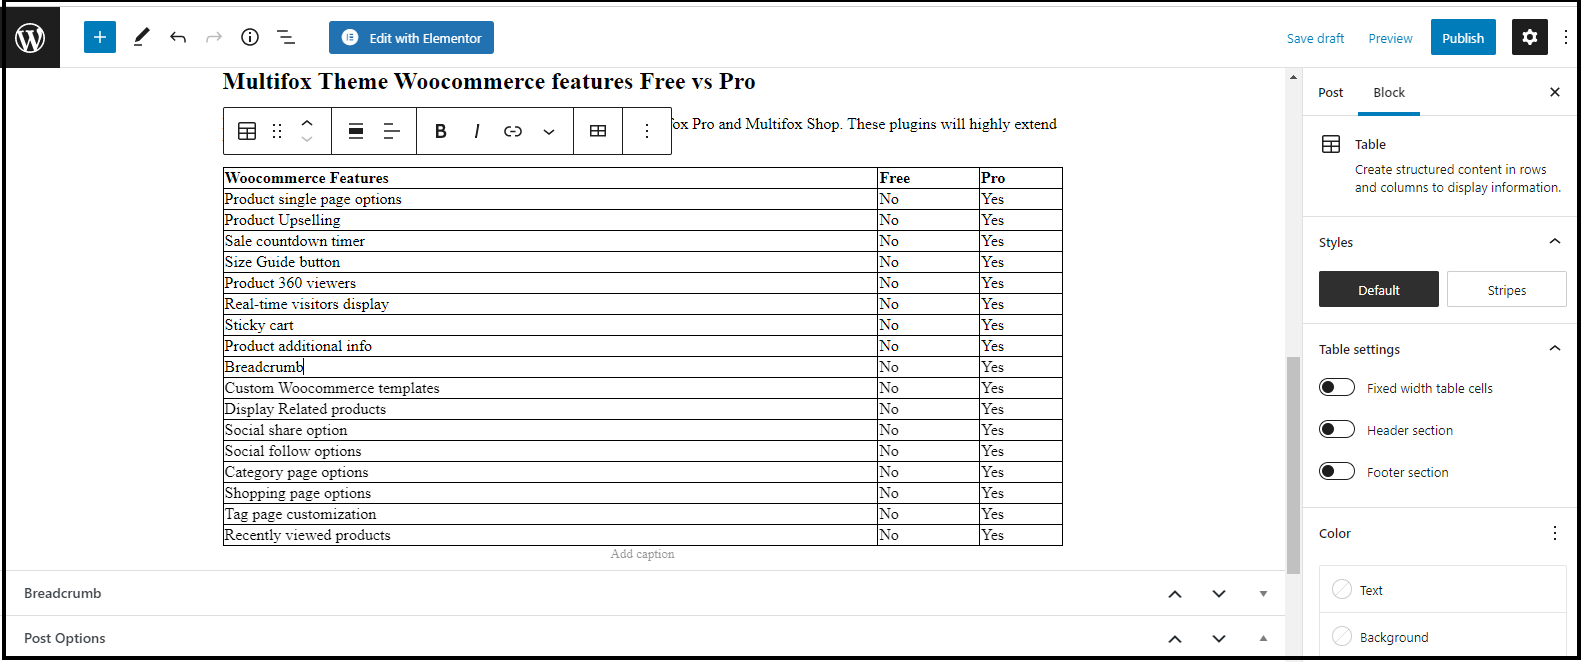 Table is inserted from Google docs